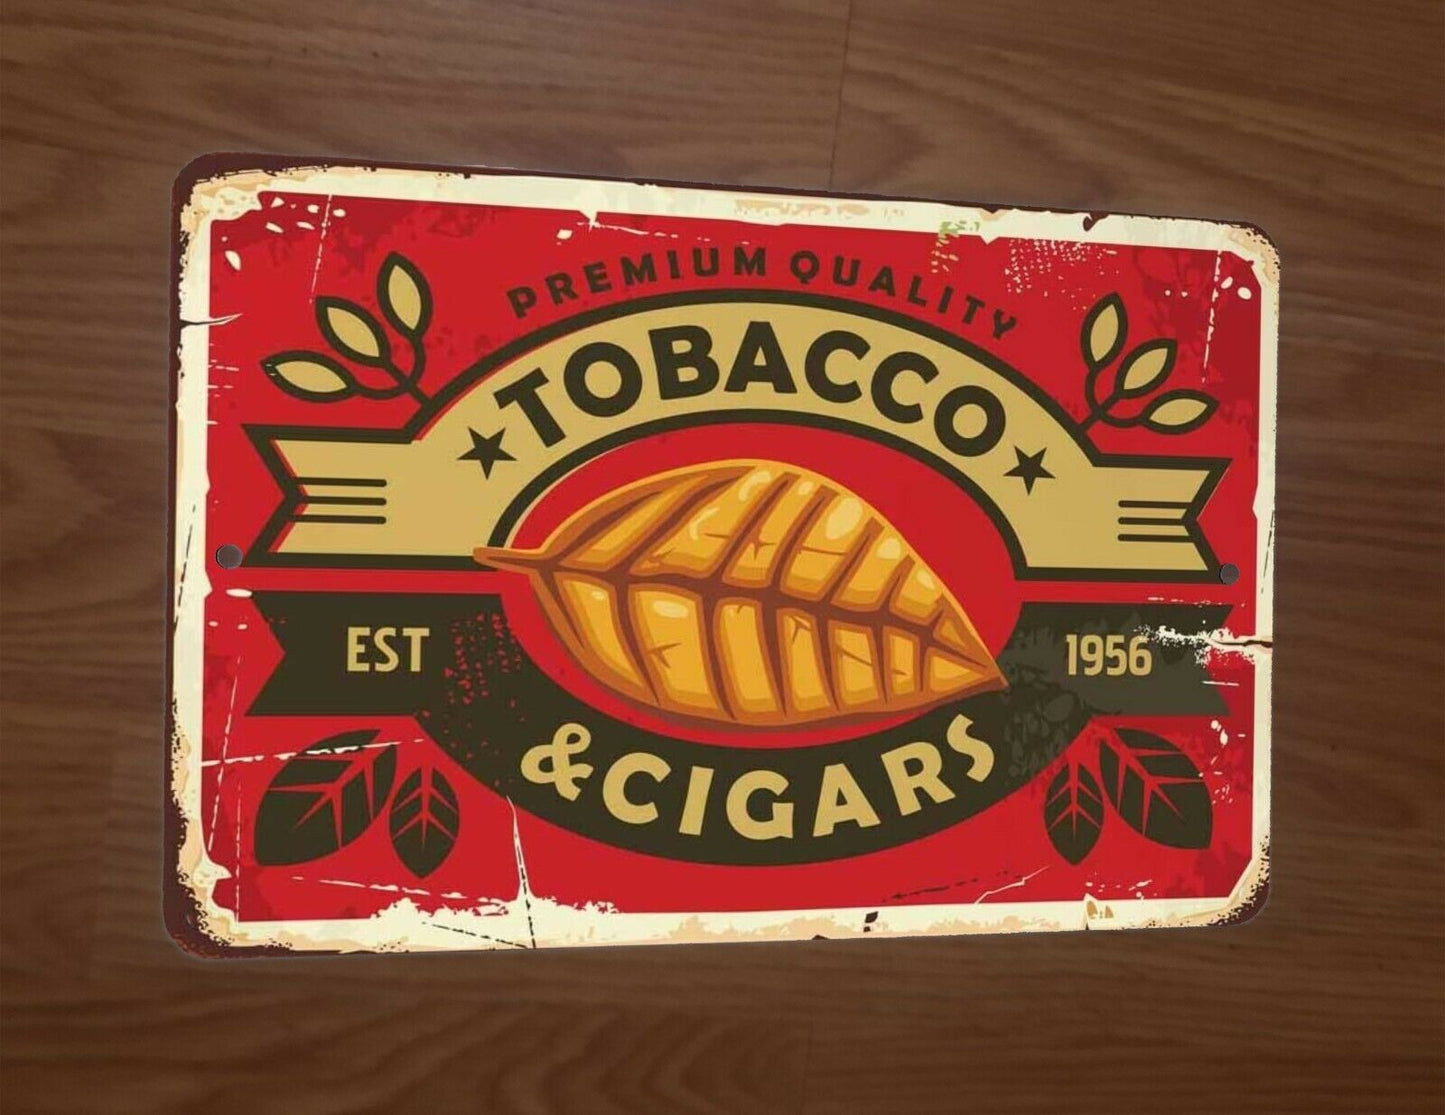 Vintage Premium Tobacco and Cigars Ad 8x12 Metal Wall Sign